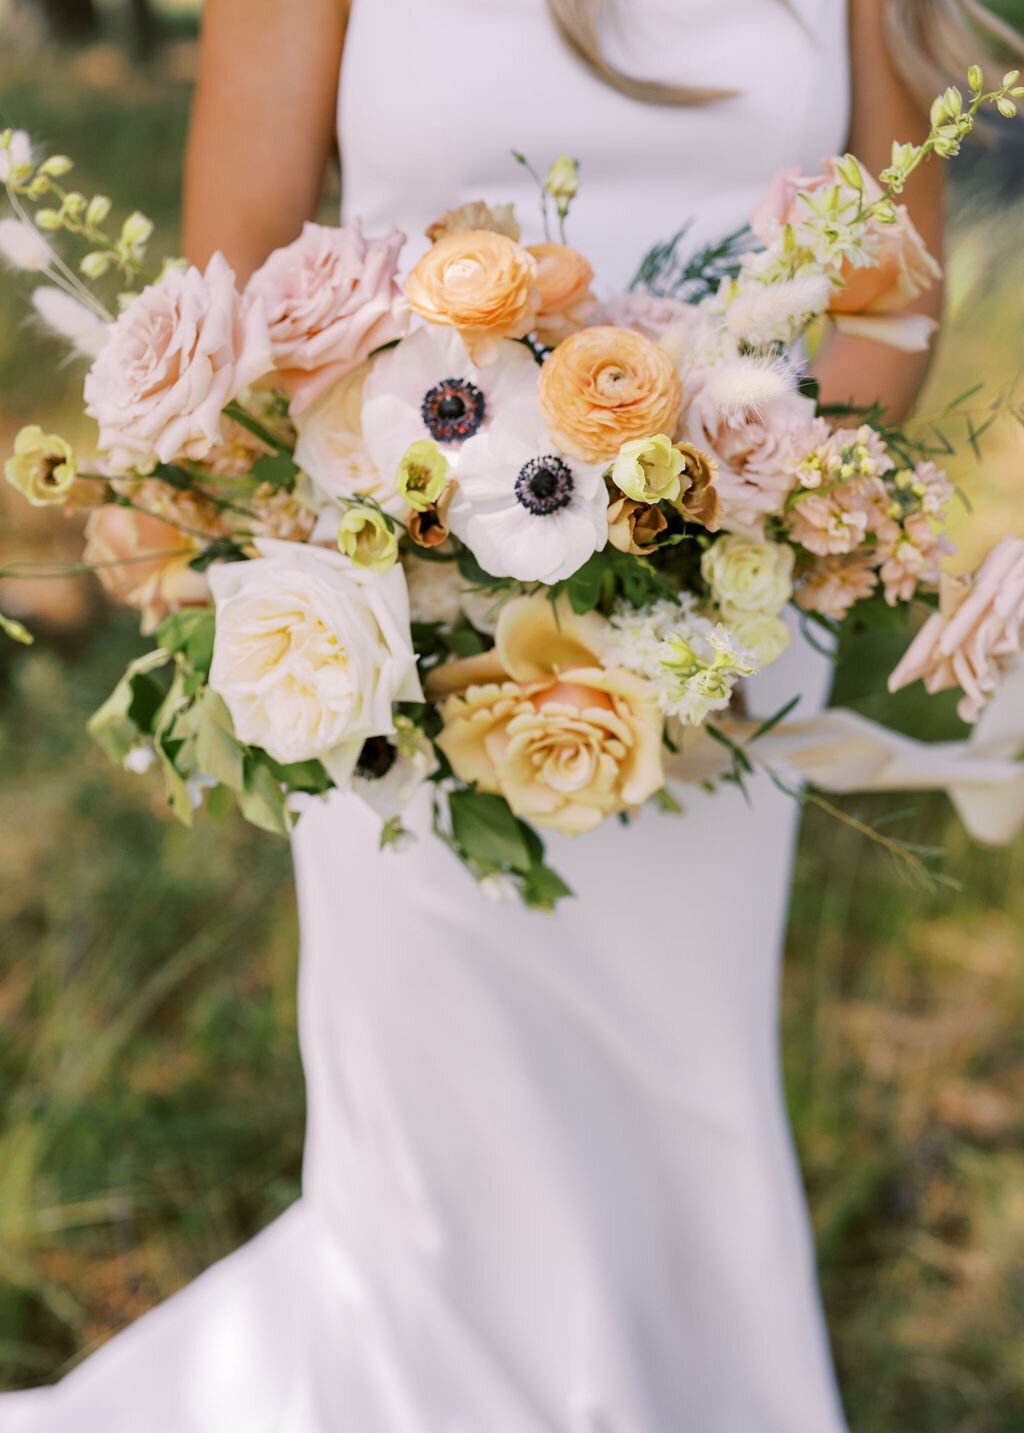 Bride holding a wedding bouquet of pastel anemone, garden roses and ranunculus